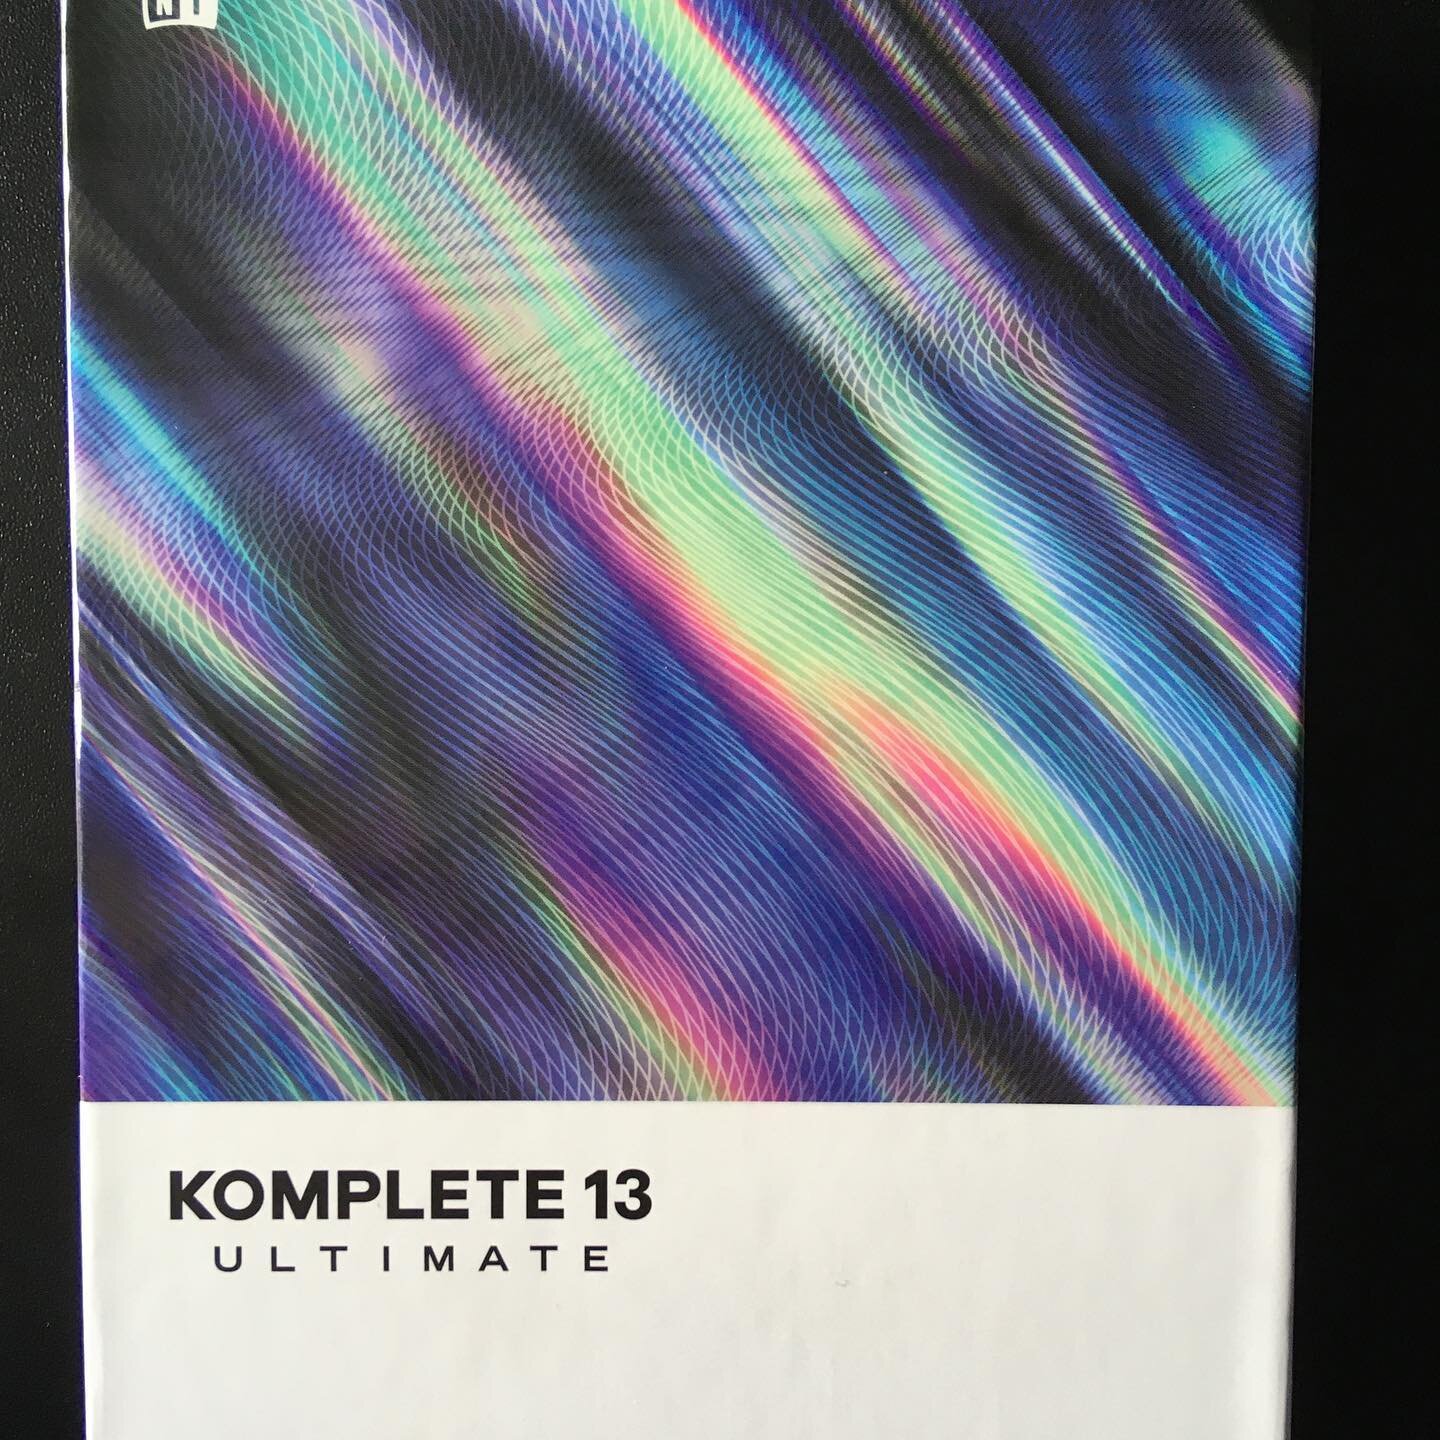 Just landed end of last week... #nativeinstruments Komplete 13 Ultimate. New template on the cards this weekend then!